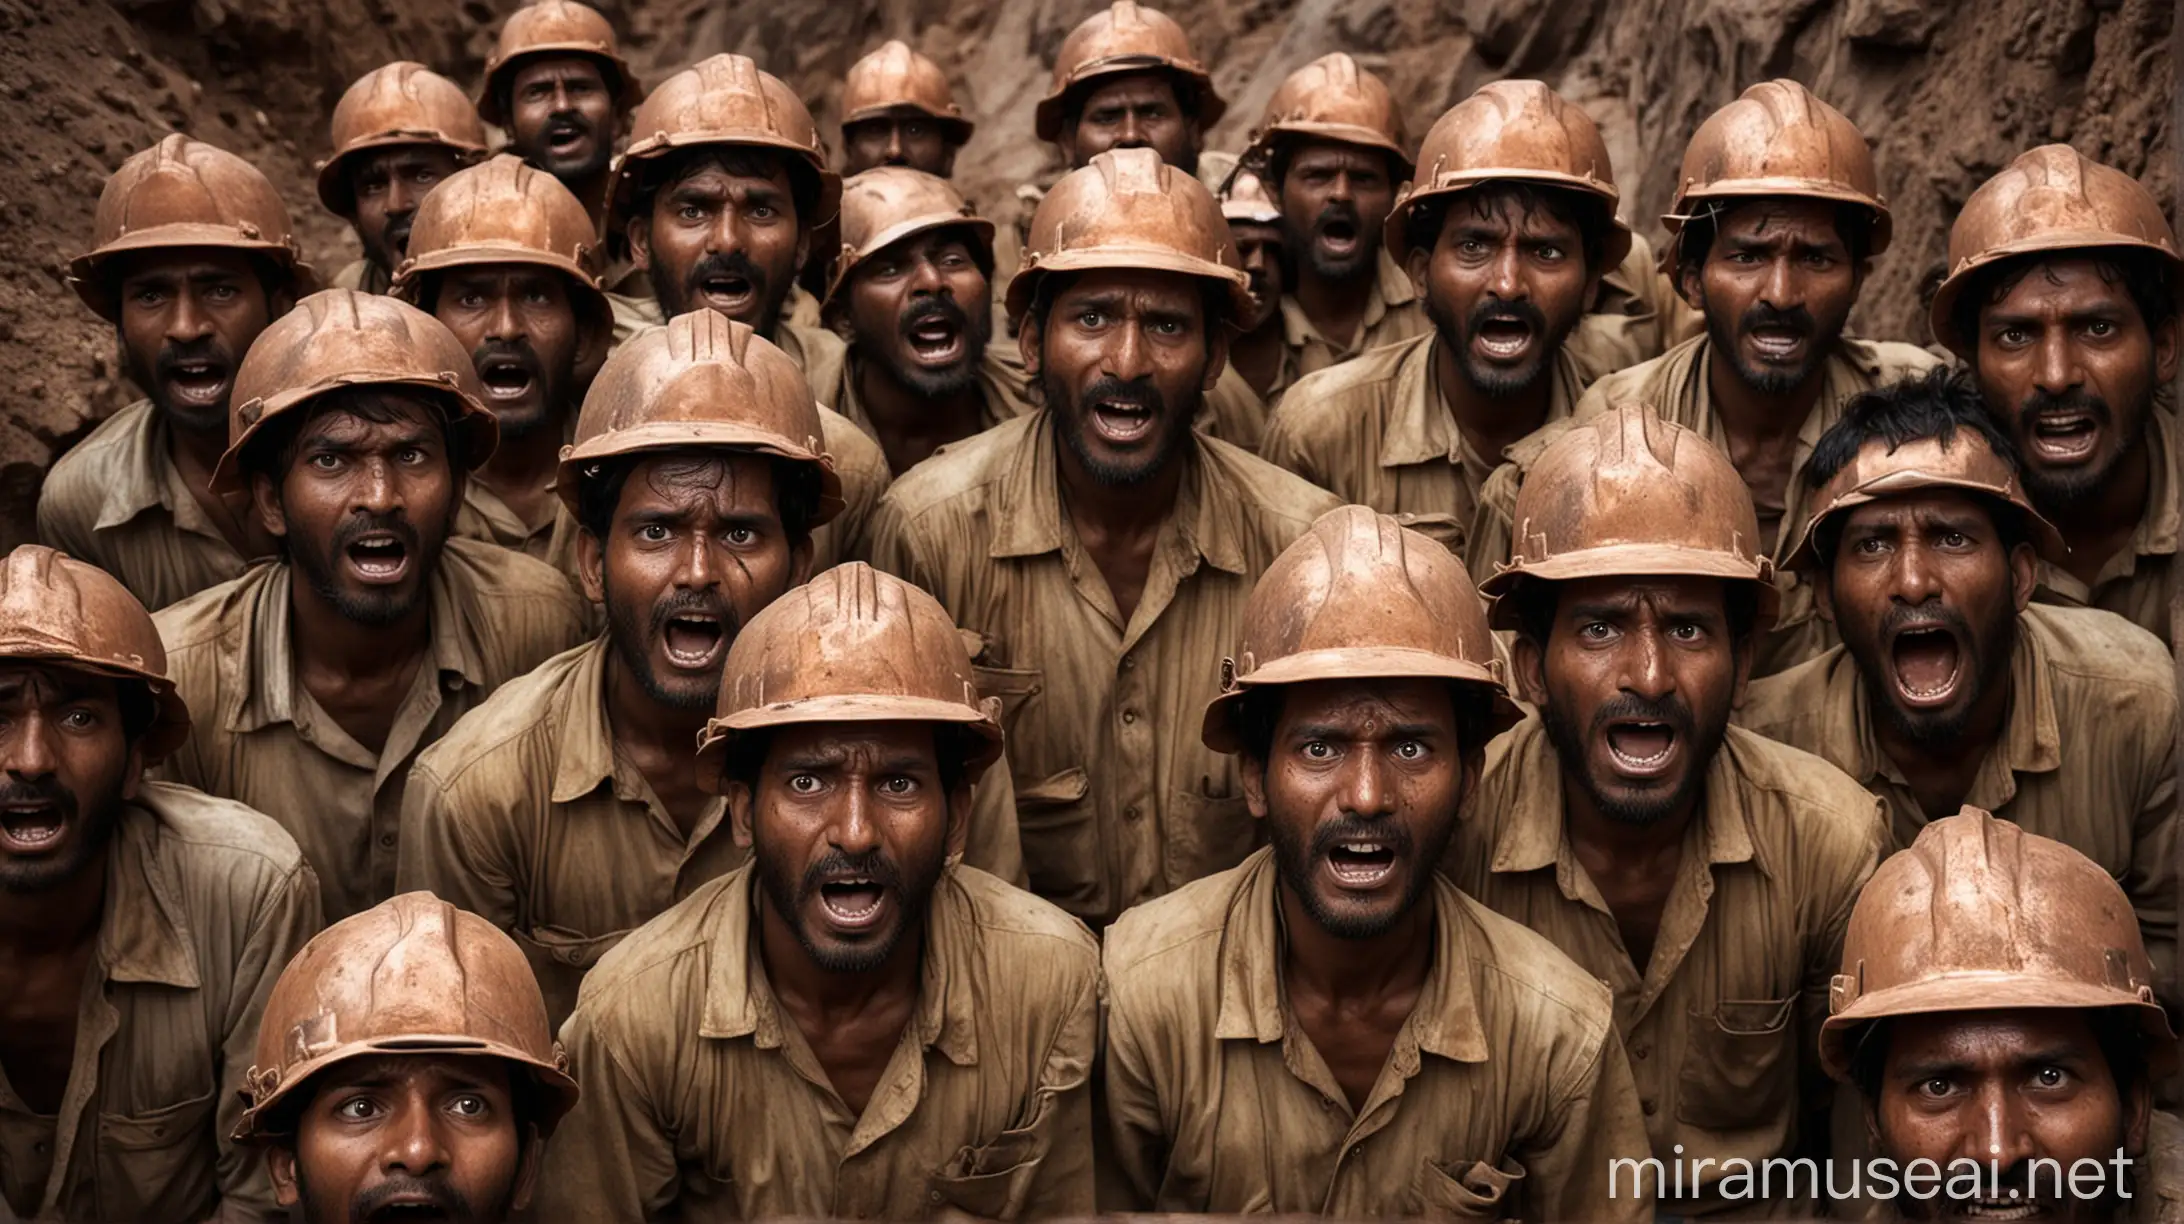 14 Indian workers were trapped in a copper mine, scared faces, dark scene,